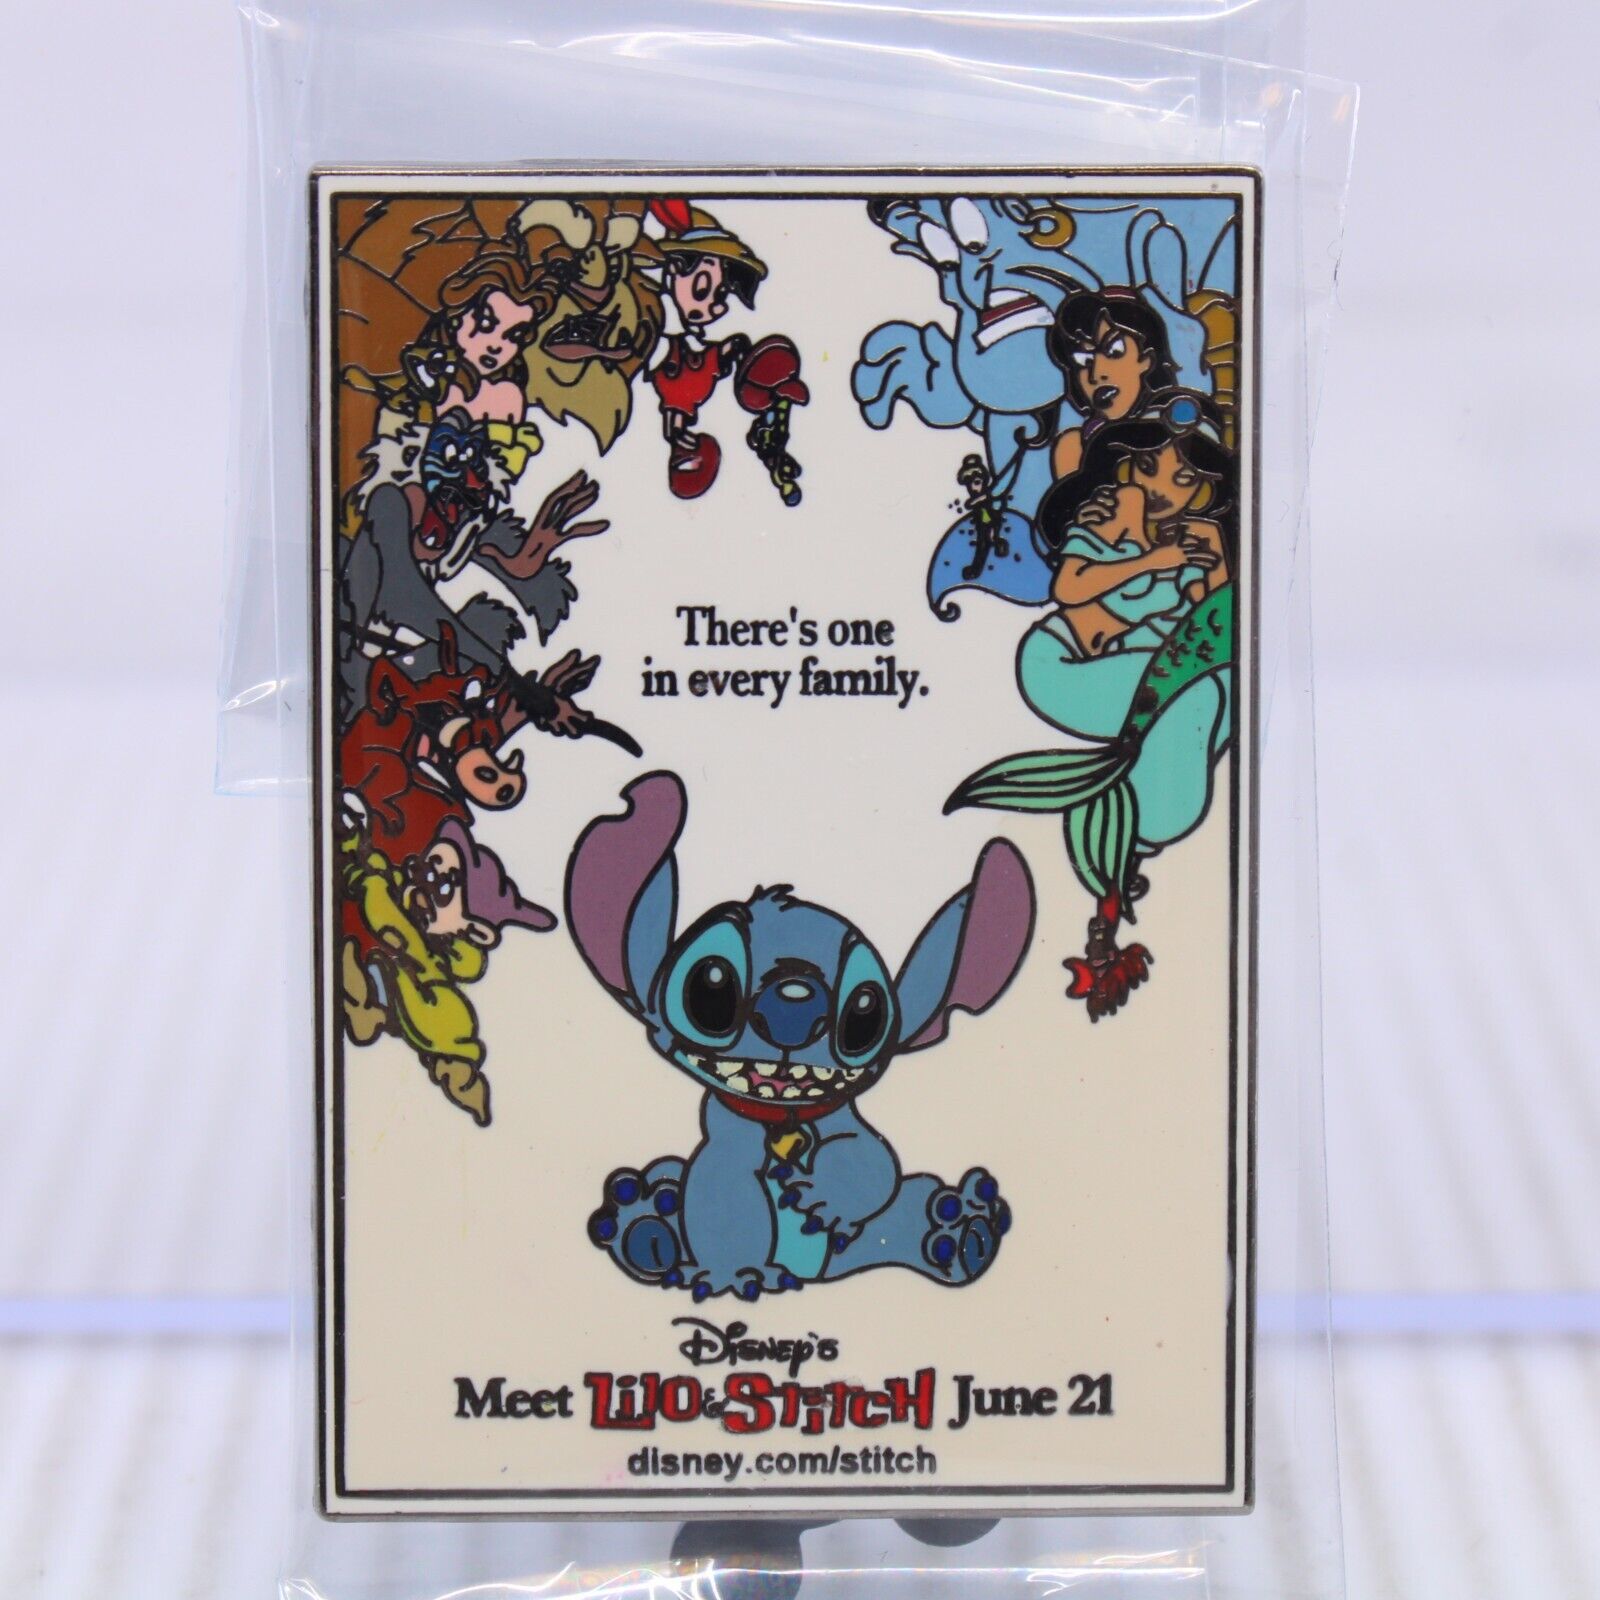 B5 Disney Shopping DS LE 250 Pin Lilo and Stitch Movie Poster Belle Beast Ariel